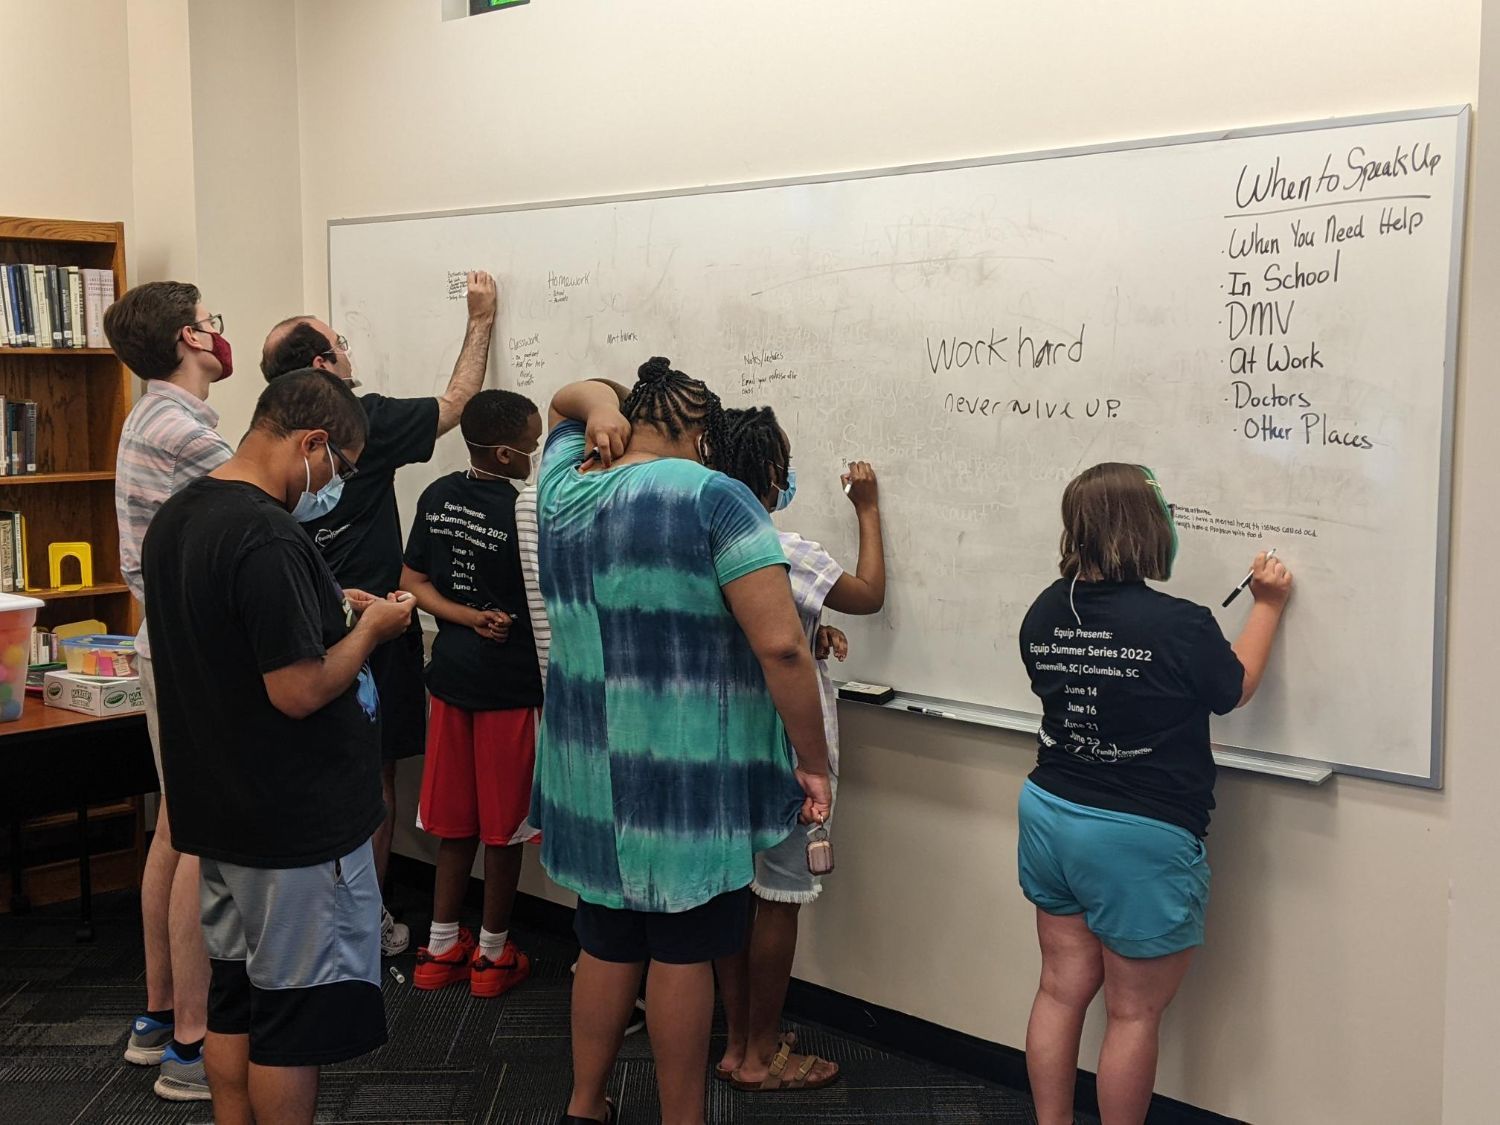 A group of young adults with disabilities who are wearing face masks stand facing a white board at the Equip Summer Series. Several of them write encouraging messages on the board such as work hard, and never give up. Others stand behind them waiting their turn to write messages on the board.